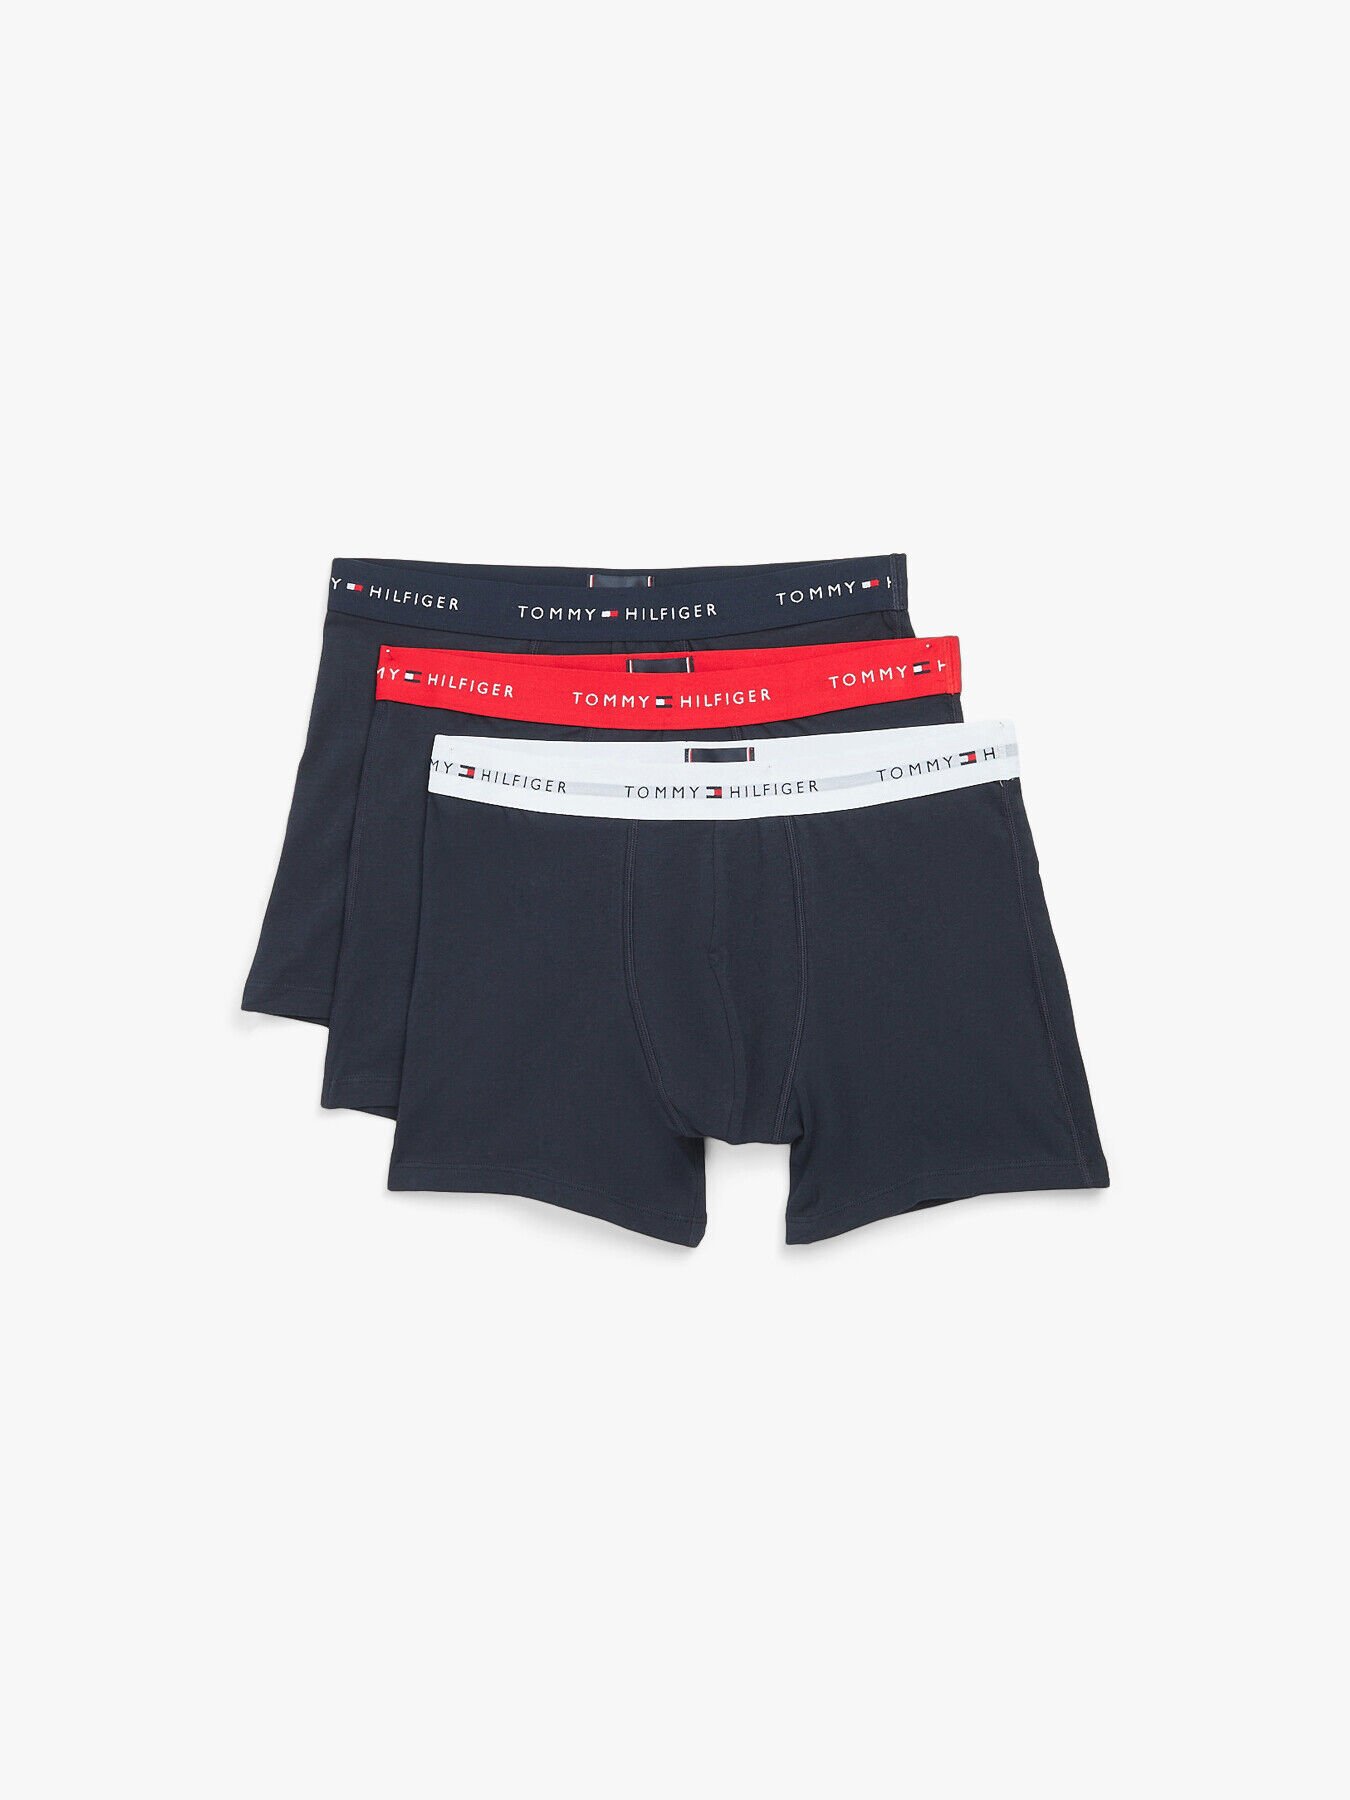 TOMMY HILFIGER 3 Pack Boxer Briefs in Desert Sky/White/Primary Red